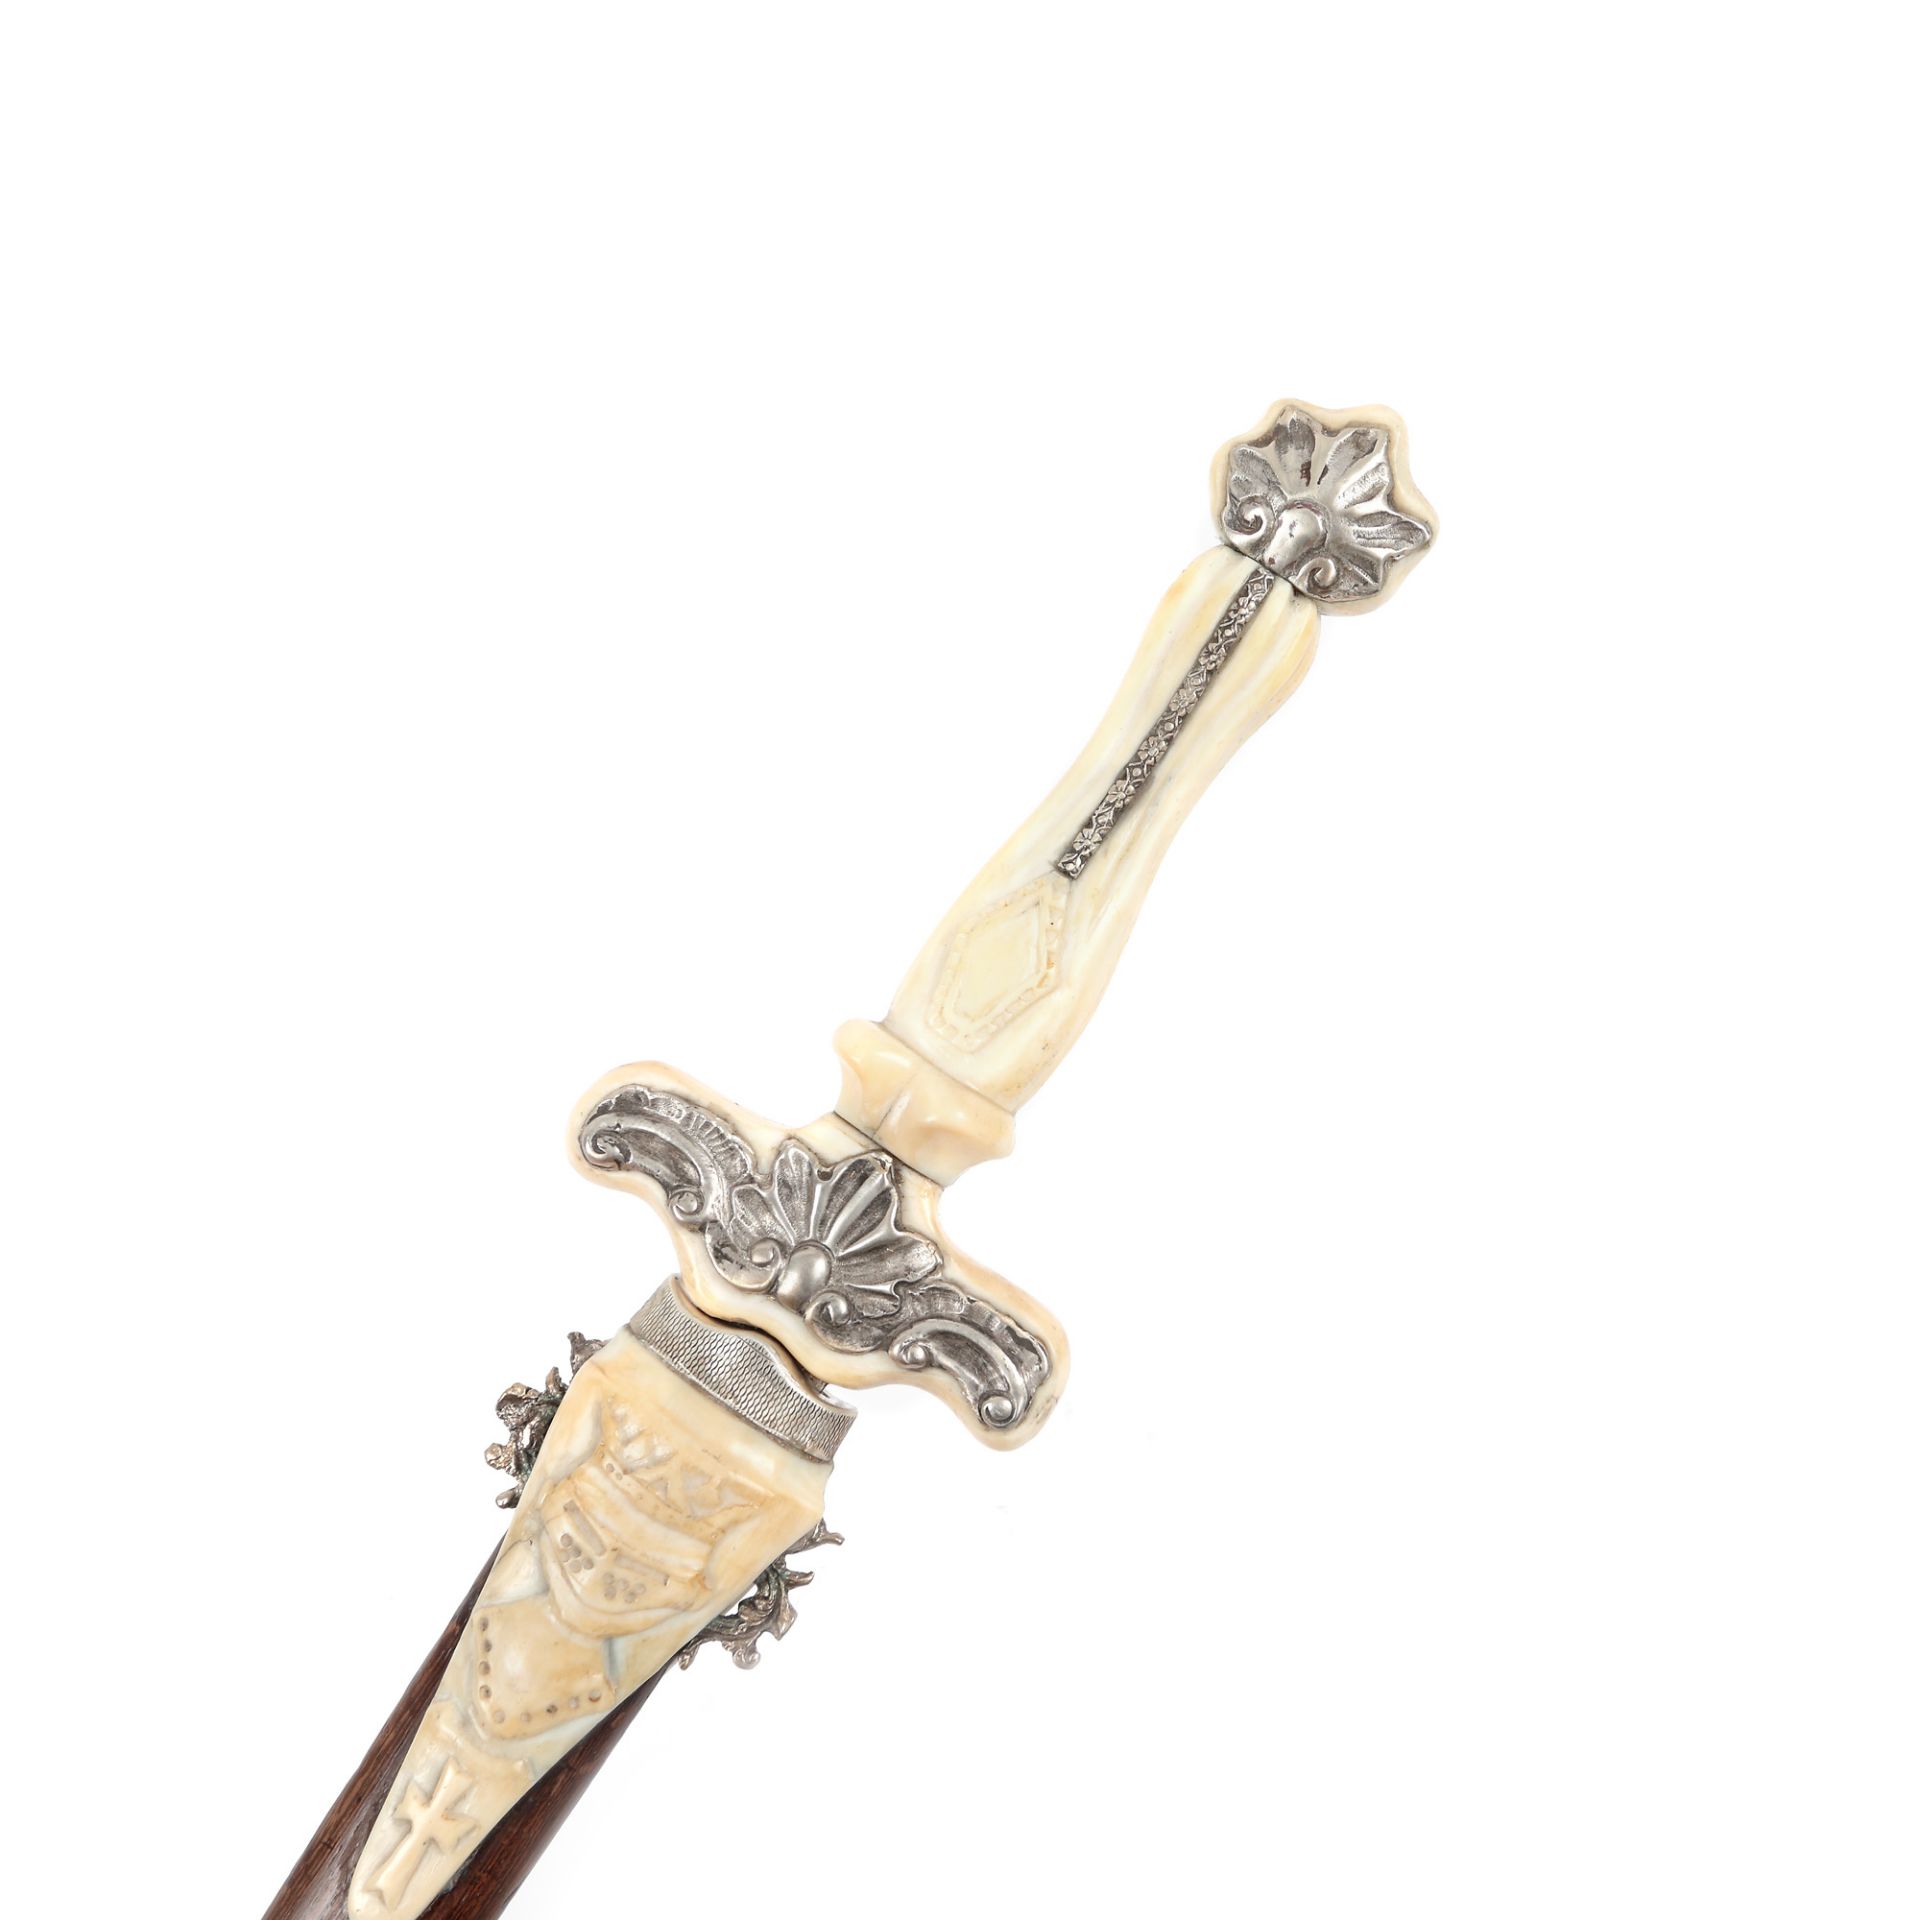 Ceremonial dagger, handle and sheath decorated with silver and ivory, bearing the Cross of Malta and - Image 5 of 5